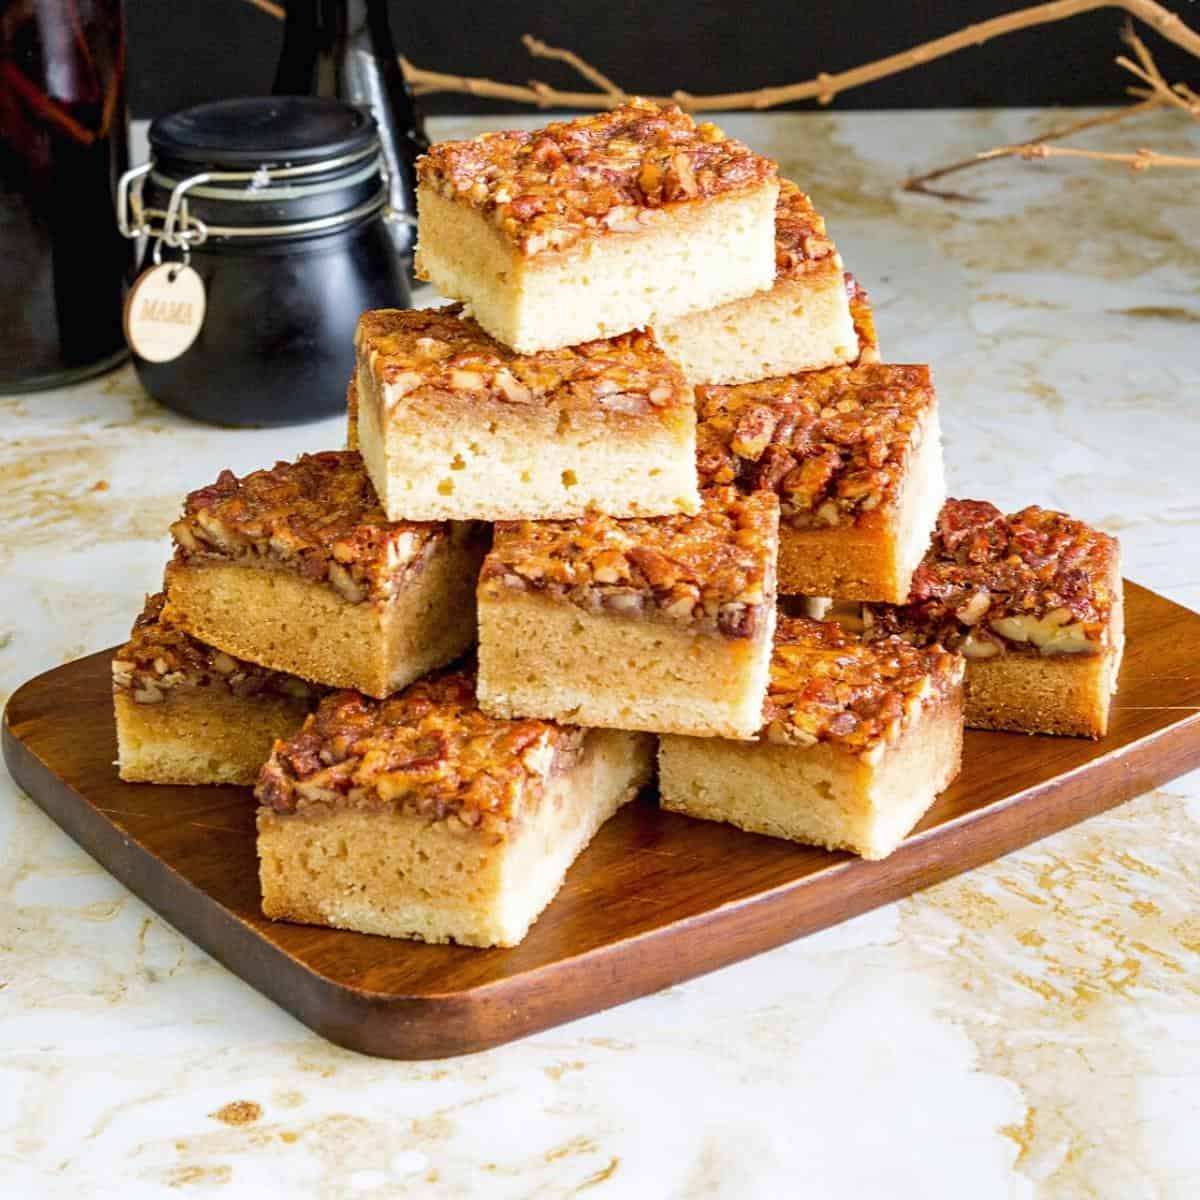 Blondies stacked on a wooden board.